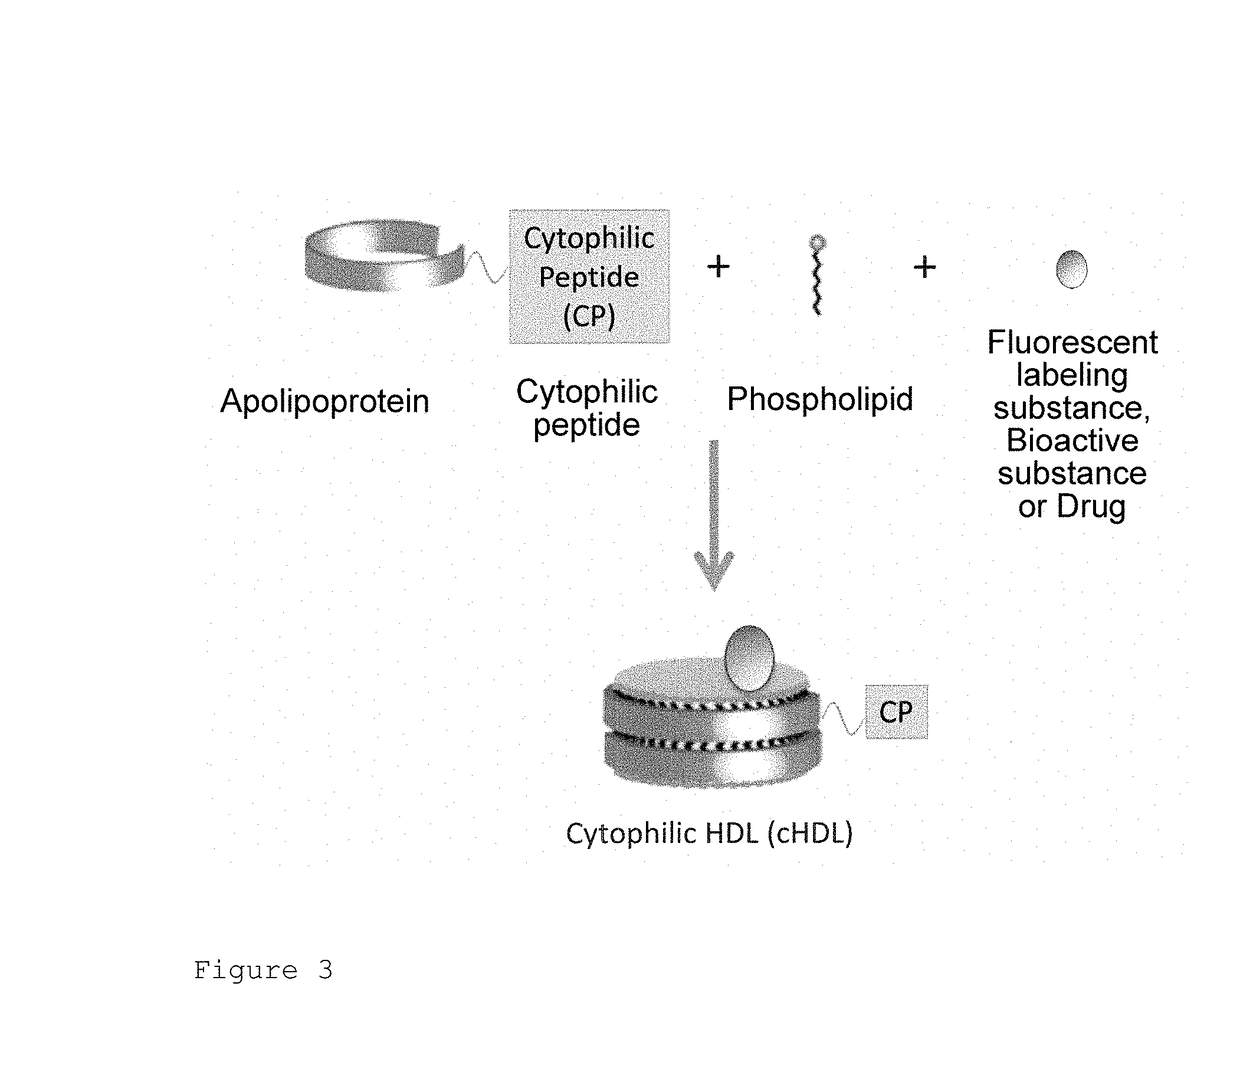 High-density lipoprotein, and delivery of drug to posterior segment of eye by ocular instillation of said cytophilic peptide-fused high-density lipoprotein